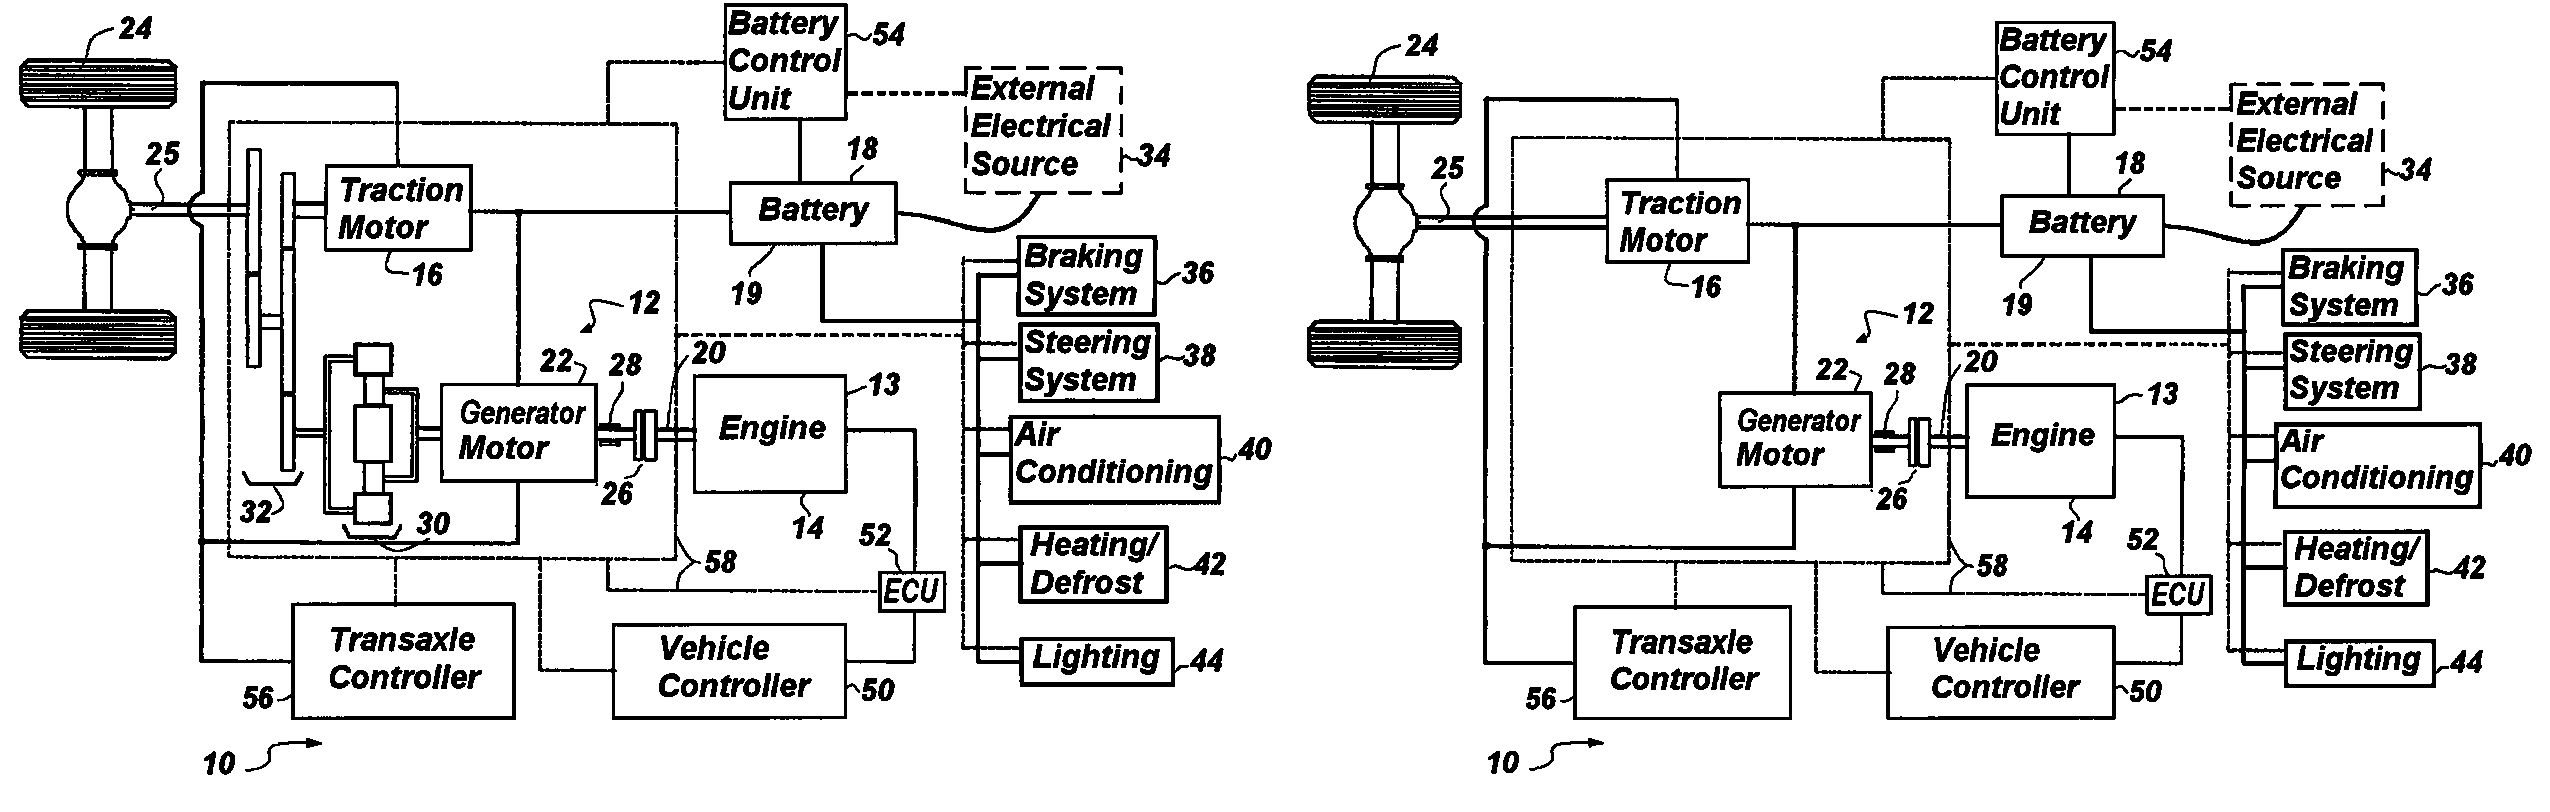 Self-learning control system for plug-in hybrid vehicles